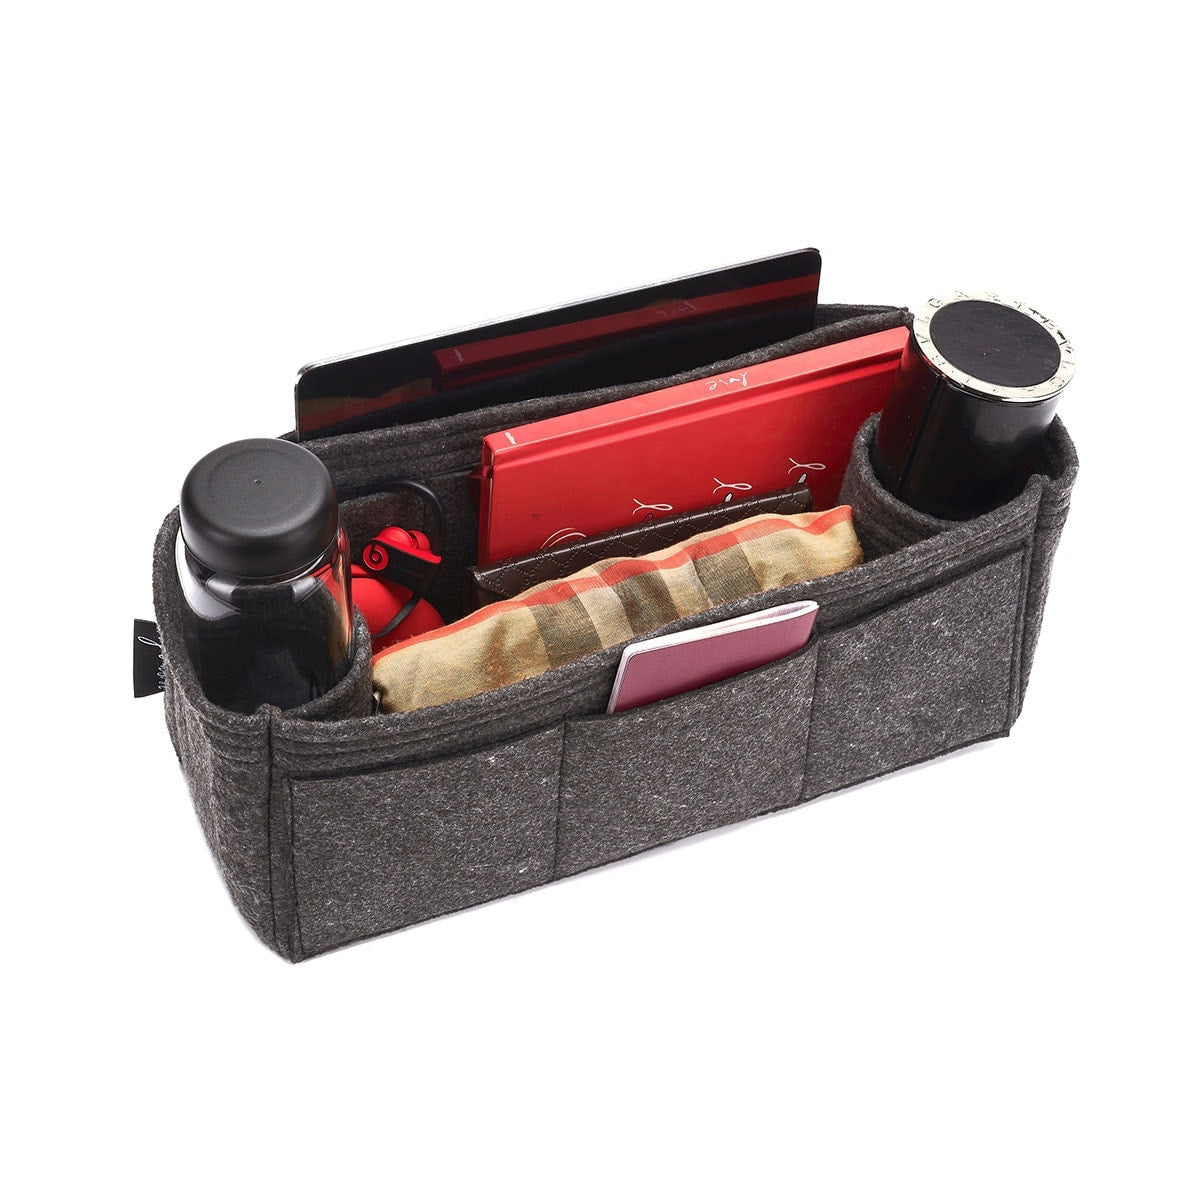 Louis Vuitton Artsy Organizer Insert, Bag Organizer with Double Bottle  Holders and Exterior Pockets